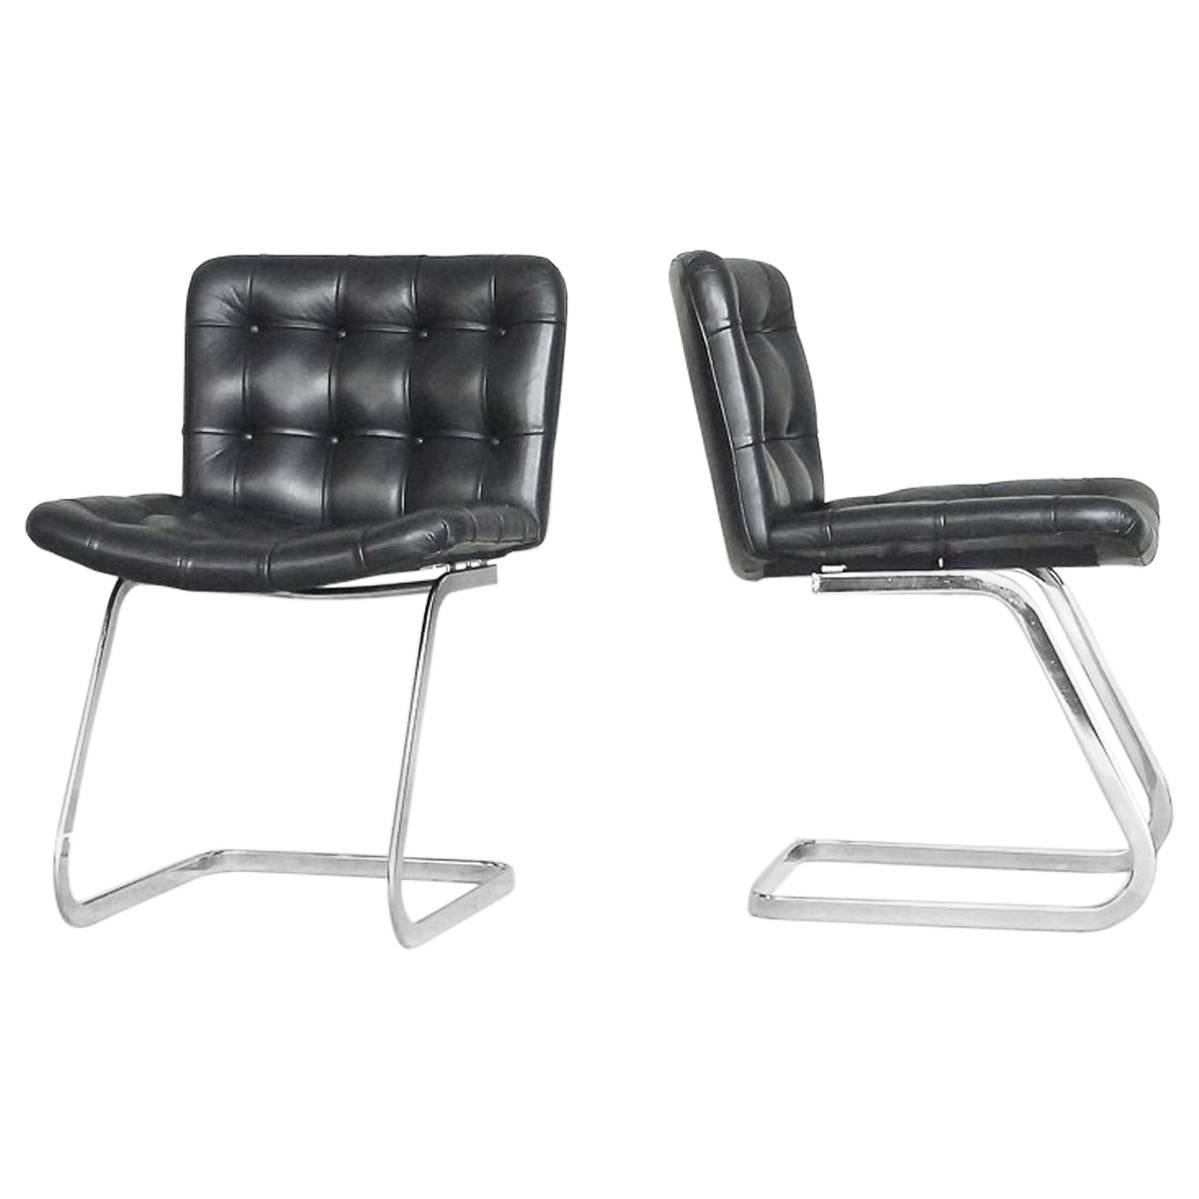 Swiss Leather RH-304 Chairs by Robert Haussmann for De Sede, 1960s, Set of Two For Sale